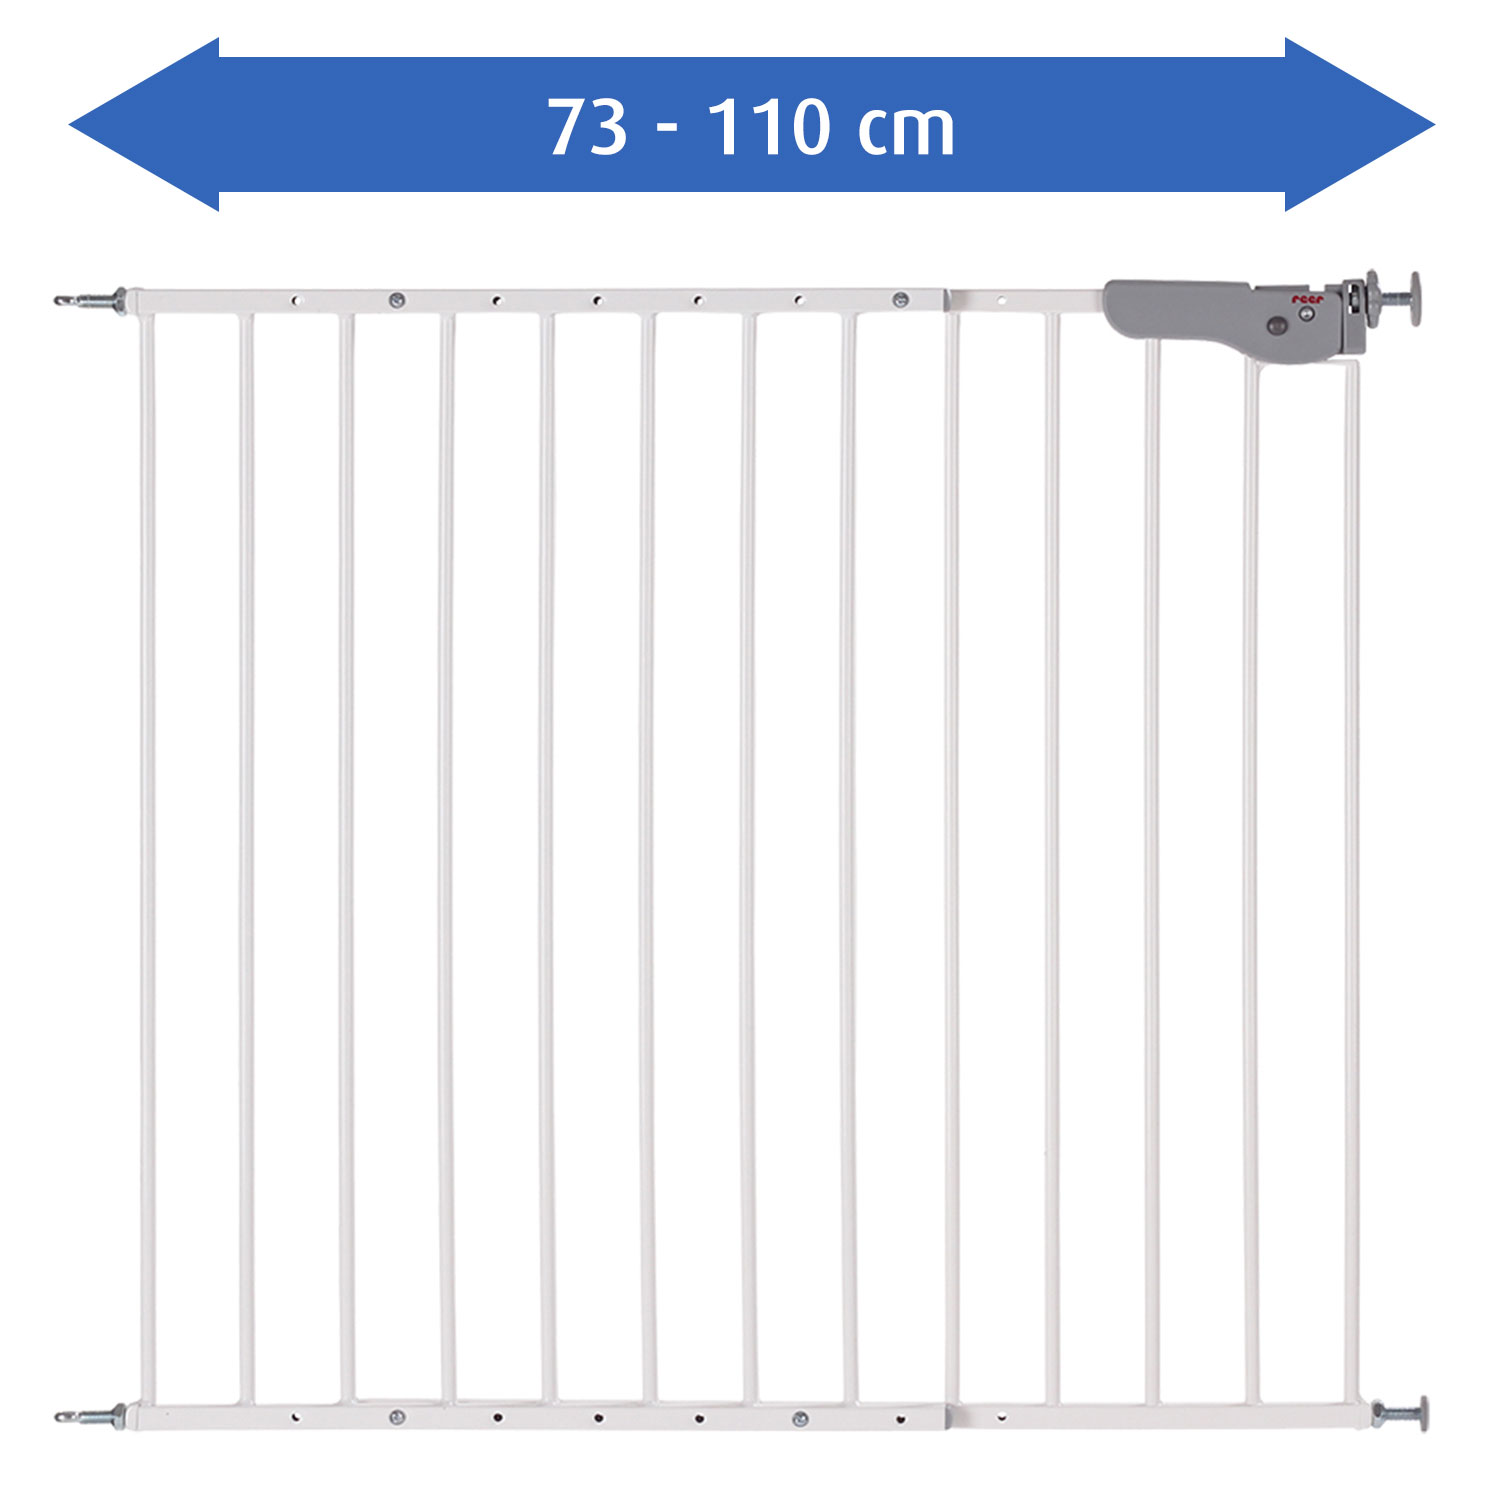 Advanced Wall-mounted gate, for gateway widths from 73 to 110 cm